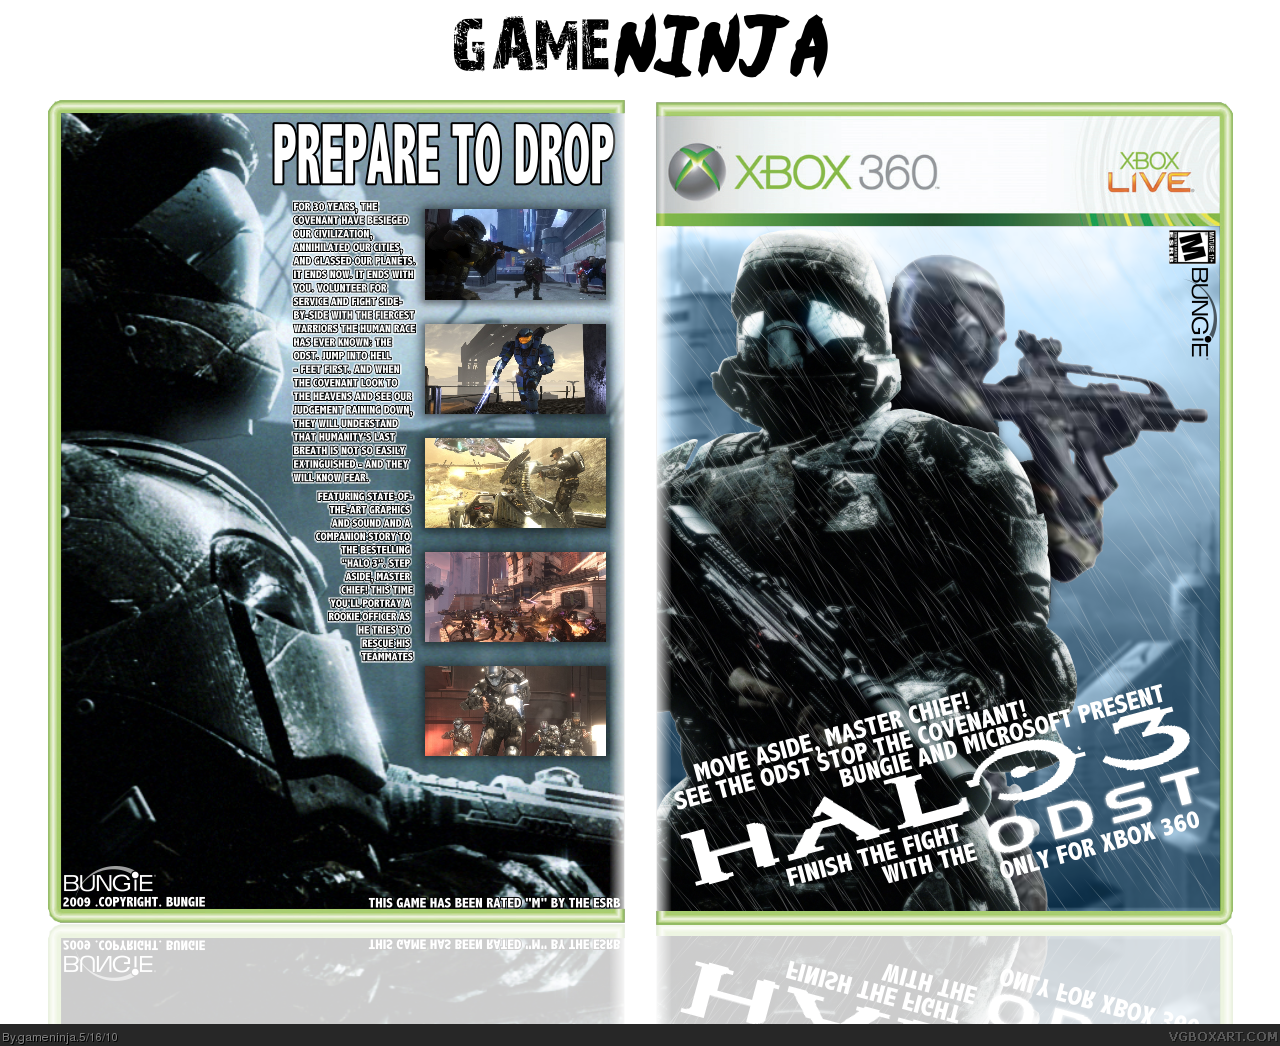 Halo 3: ODST box cover